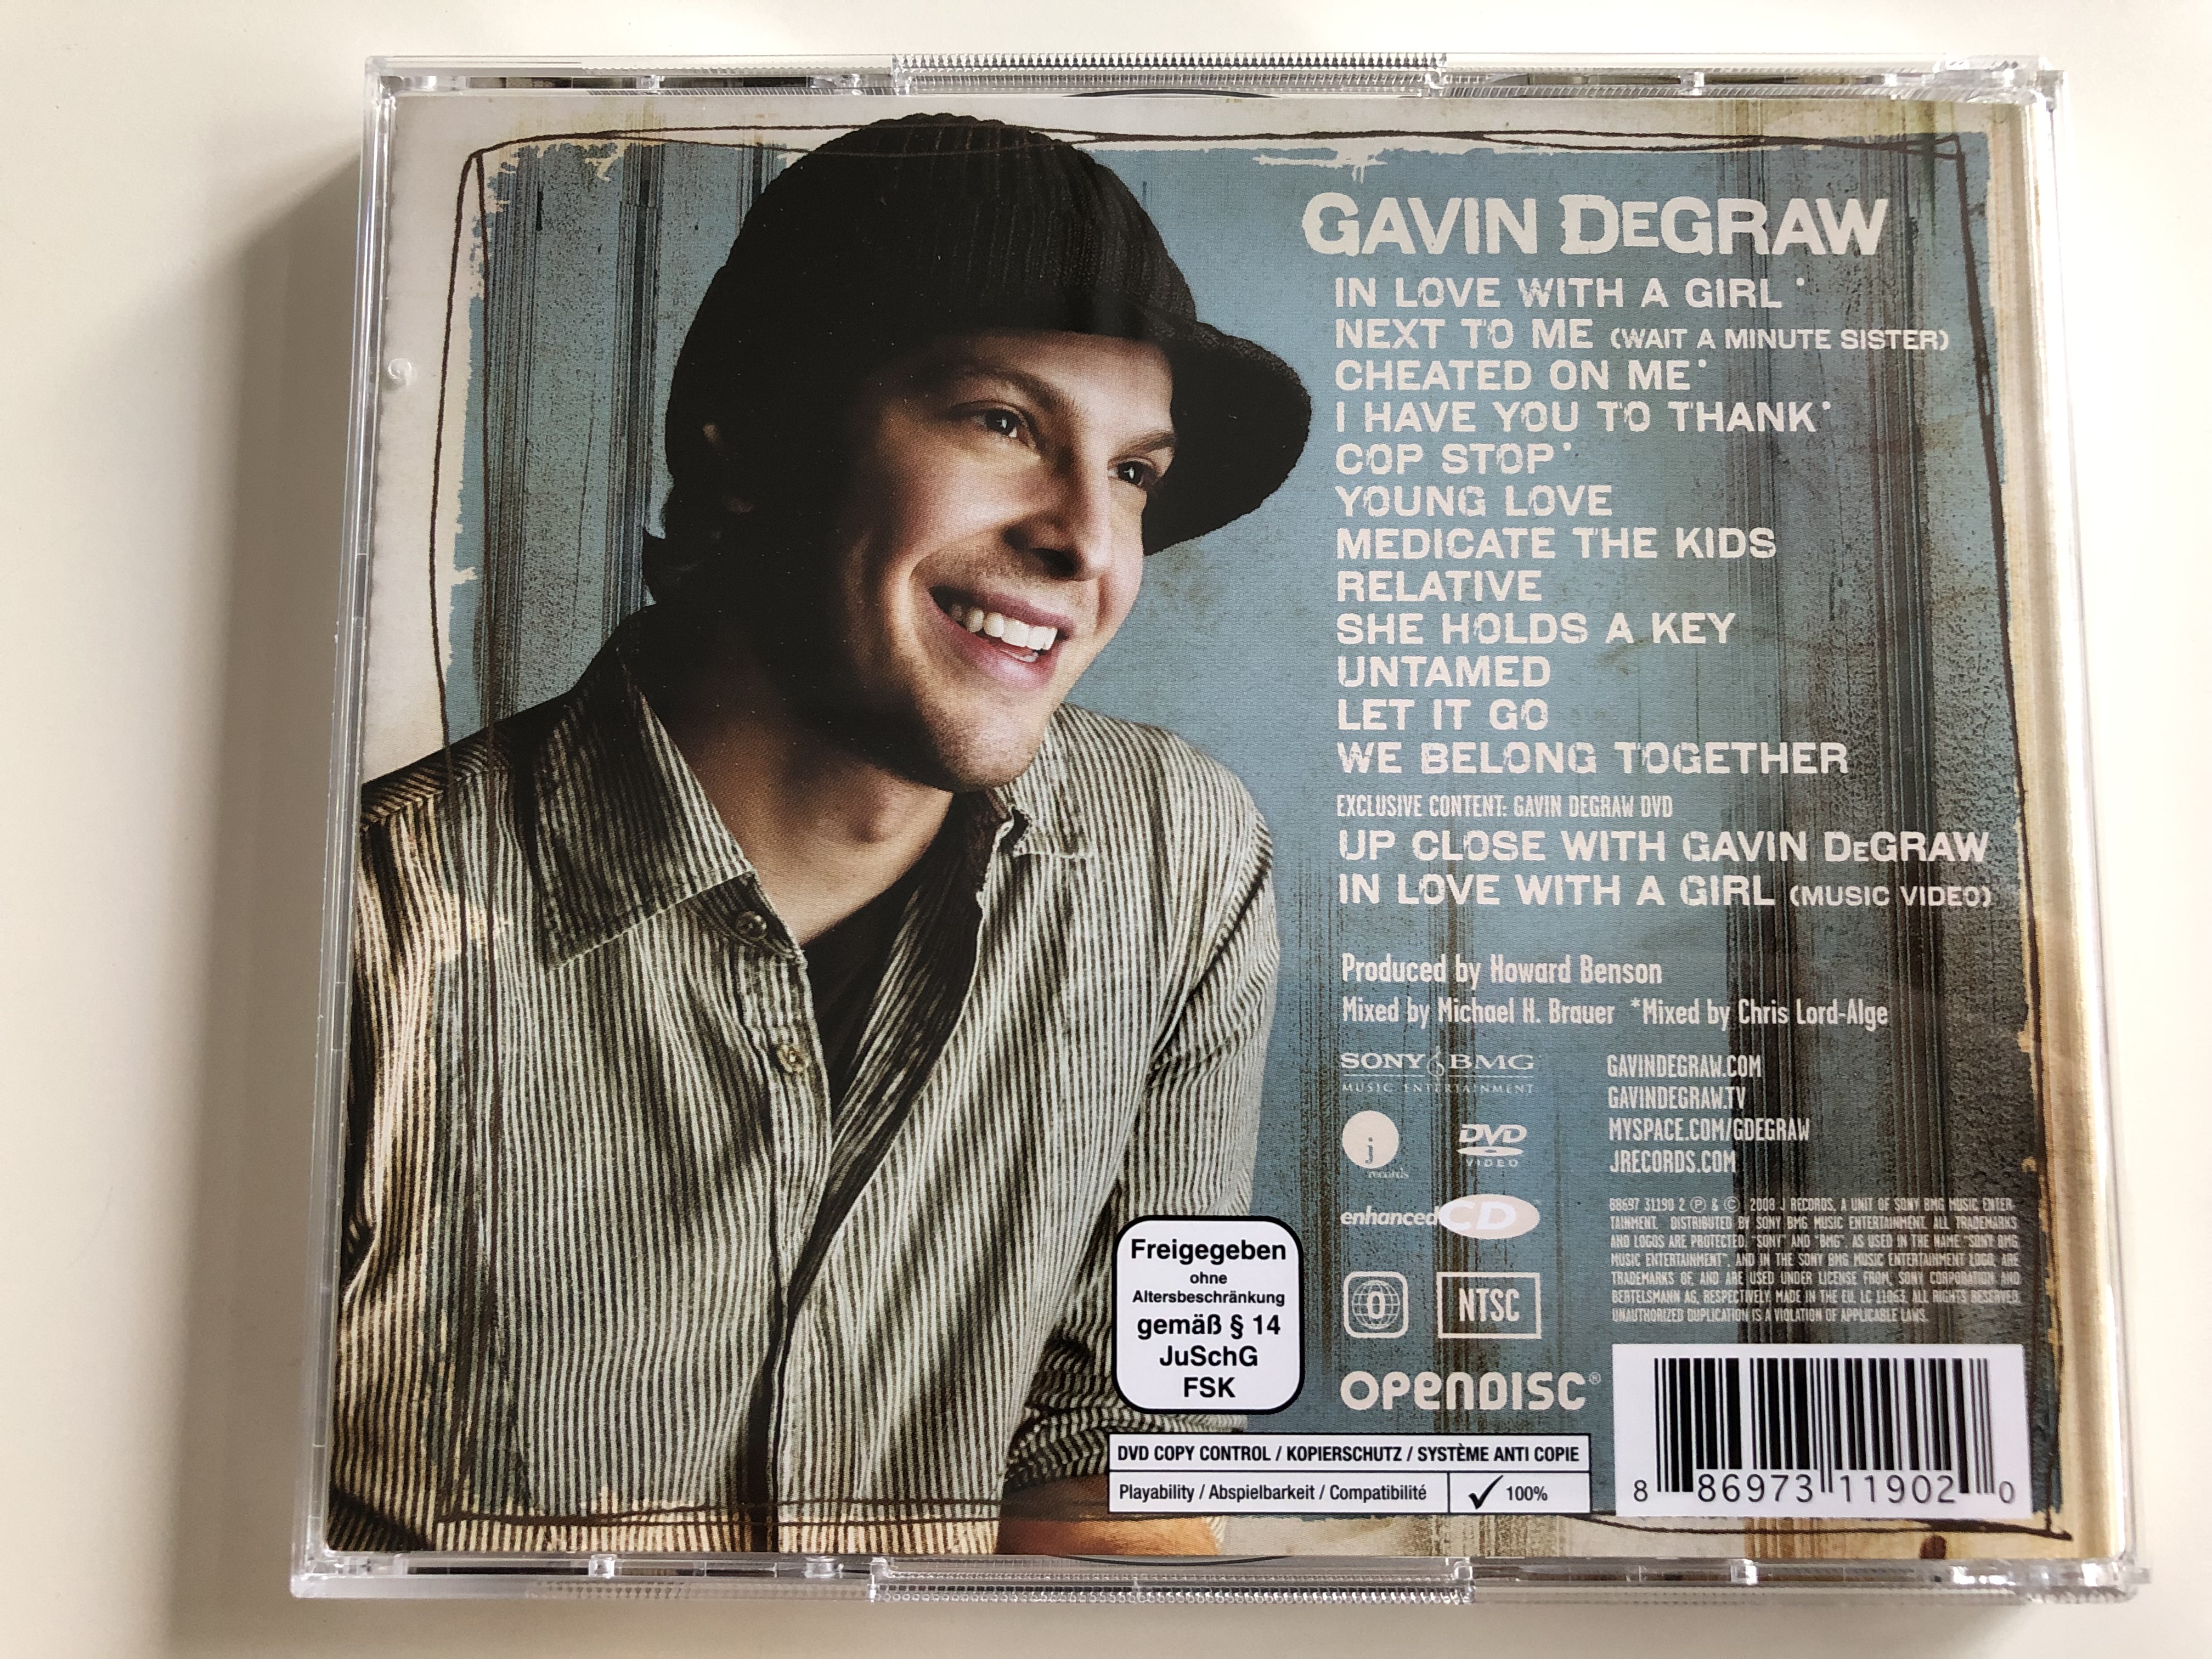 gavin-degraw-opendisc-in-love-with-a-girl-next-to-me-she-holds-a-key-let-it-go-create-your-own-link-with-gavin-degraw-dvd-2008-4-.jpg